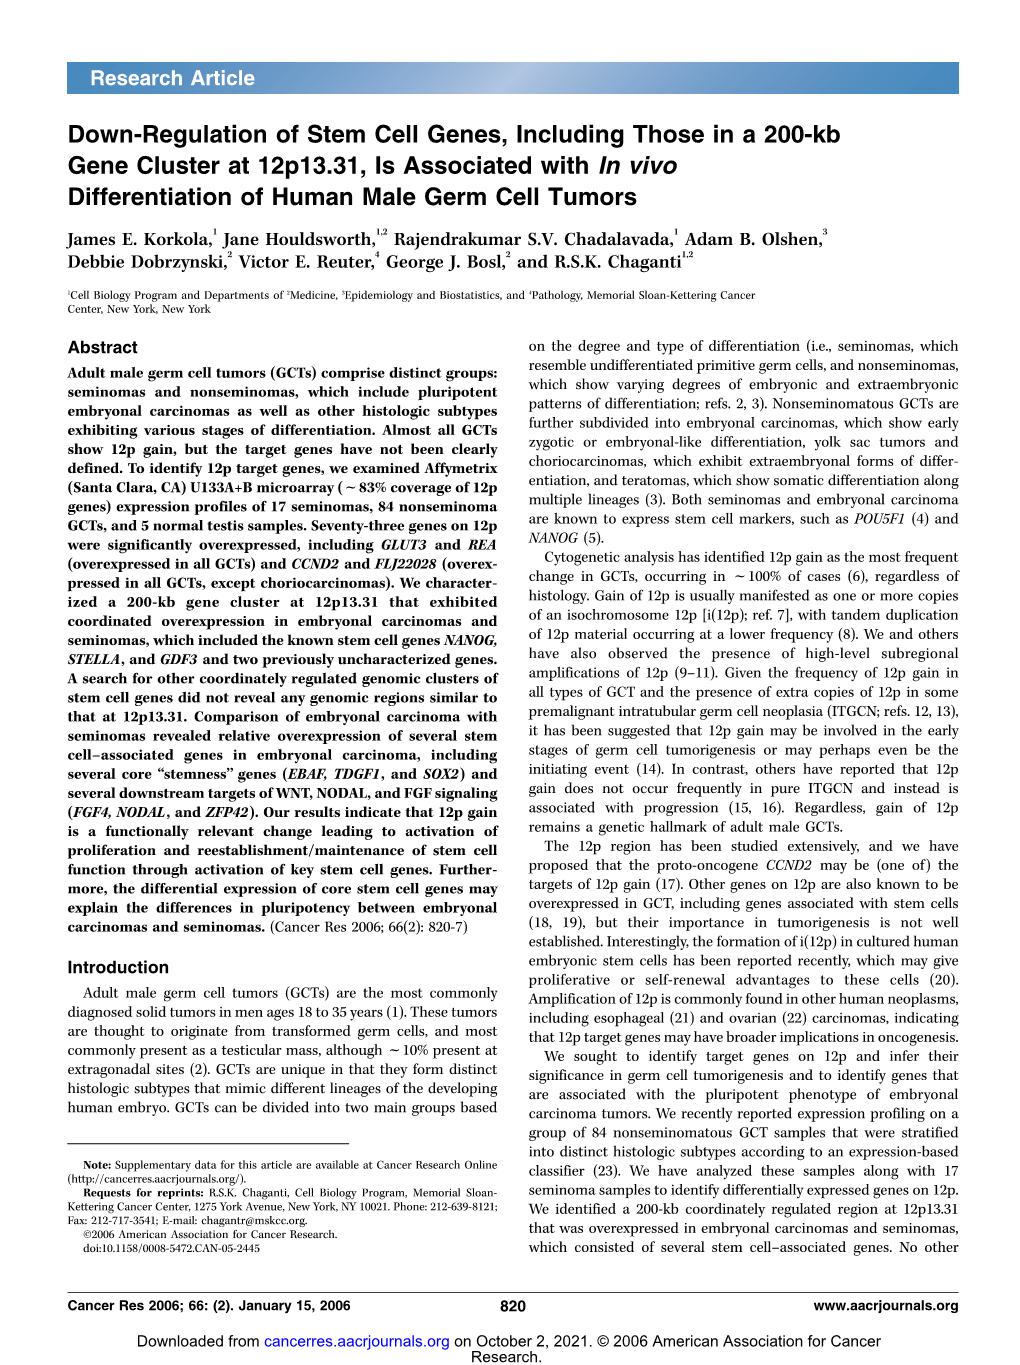 Down-Regulation of Stem Cell Genes, Including Those in a 200-Kb Gene Cluster at 12P13.31, Is Associated with in Vivo Differentiation of Human Male Germ Cell Tumors